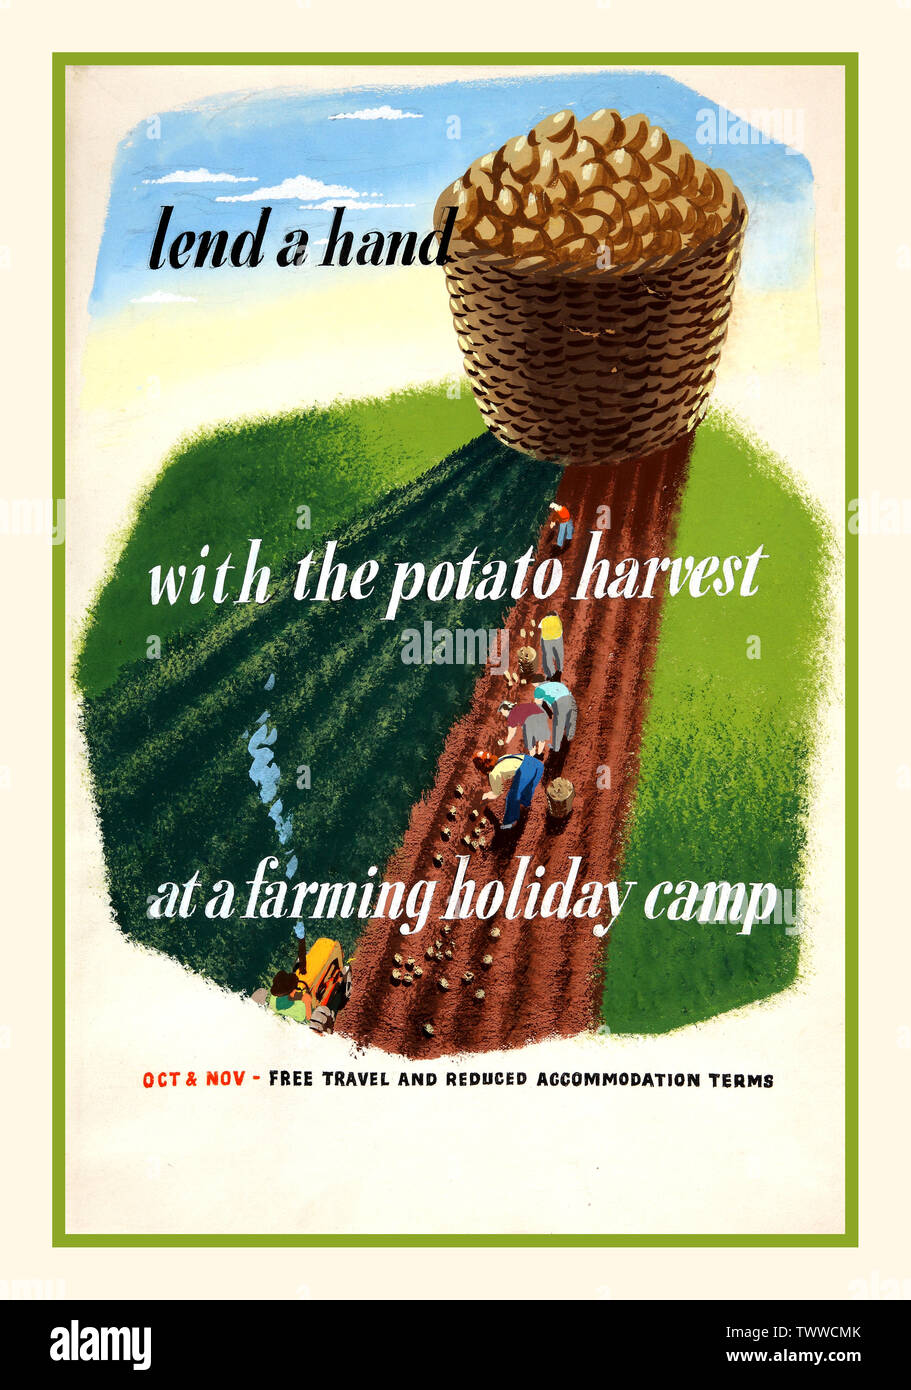 Vintage WW2 wartime food production harvest Propaganda Appeal Poster UK “Lend a hand with the potato harvest at a farming holiday camp” “Oct and Nov free travel - and reduced accomodation terms” 1940’s Food Production World War 2 Agriculture Appeal Stock Photo